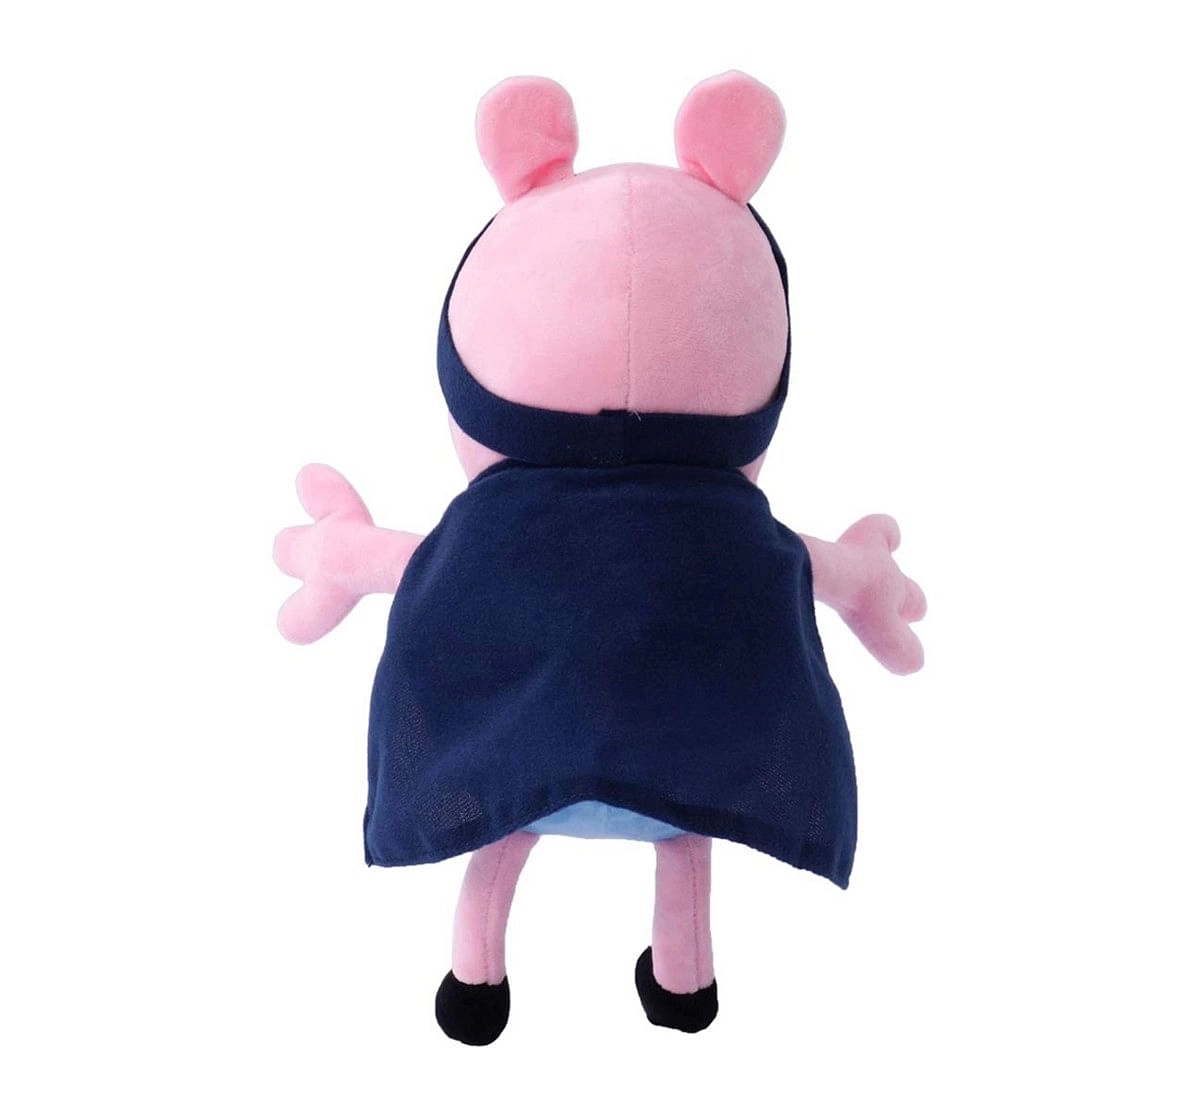 Peppa Pig George In Peter Pan Costume Soft Toy for Kids age 1Y+ - 30 Cm 